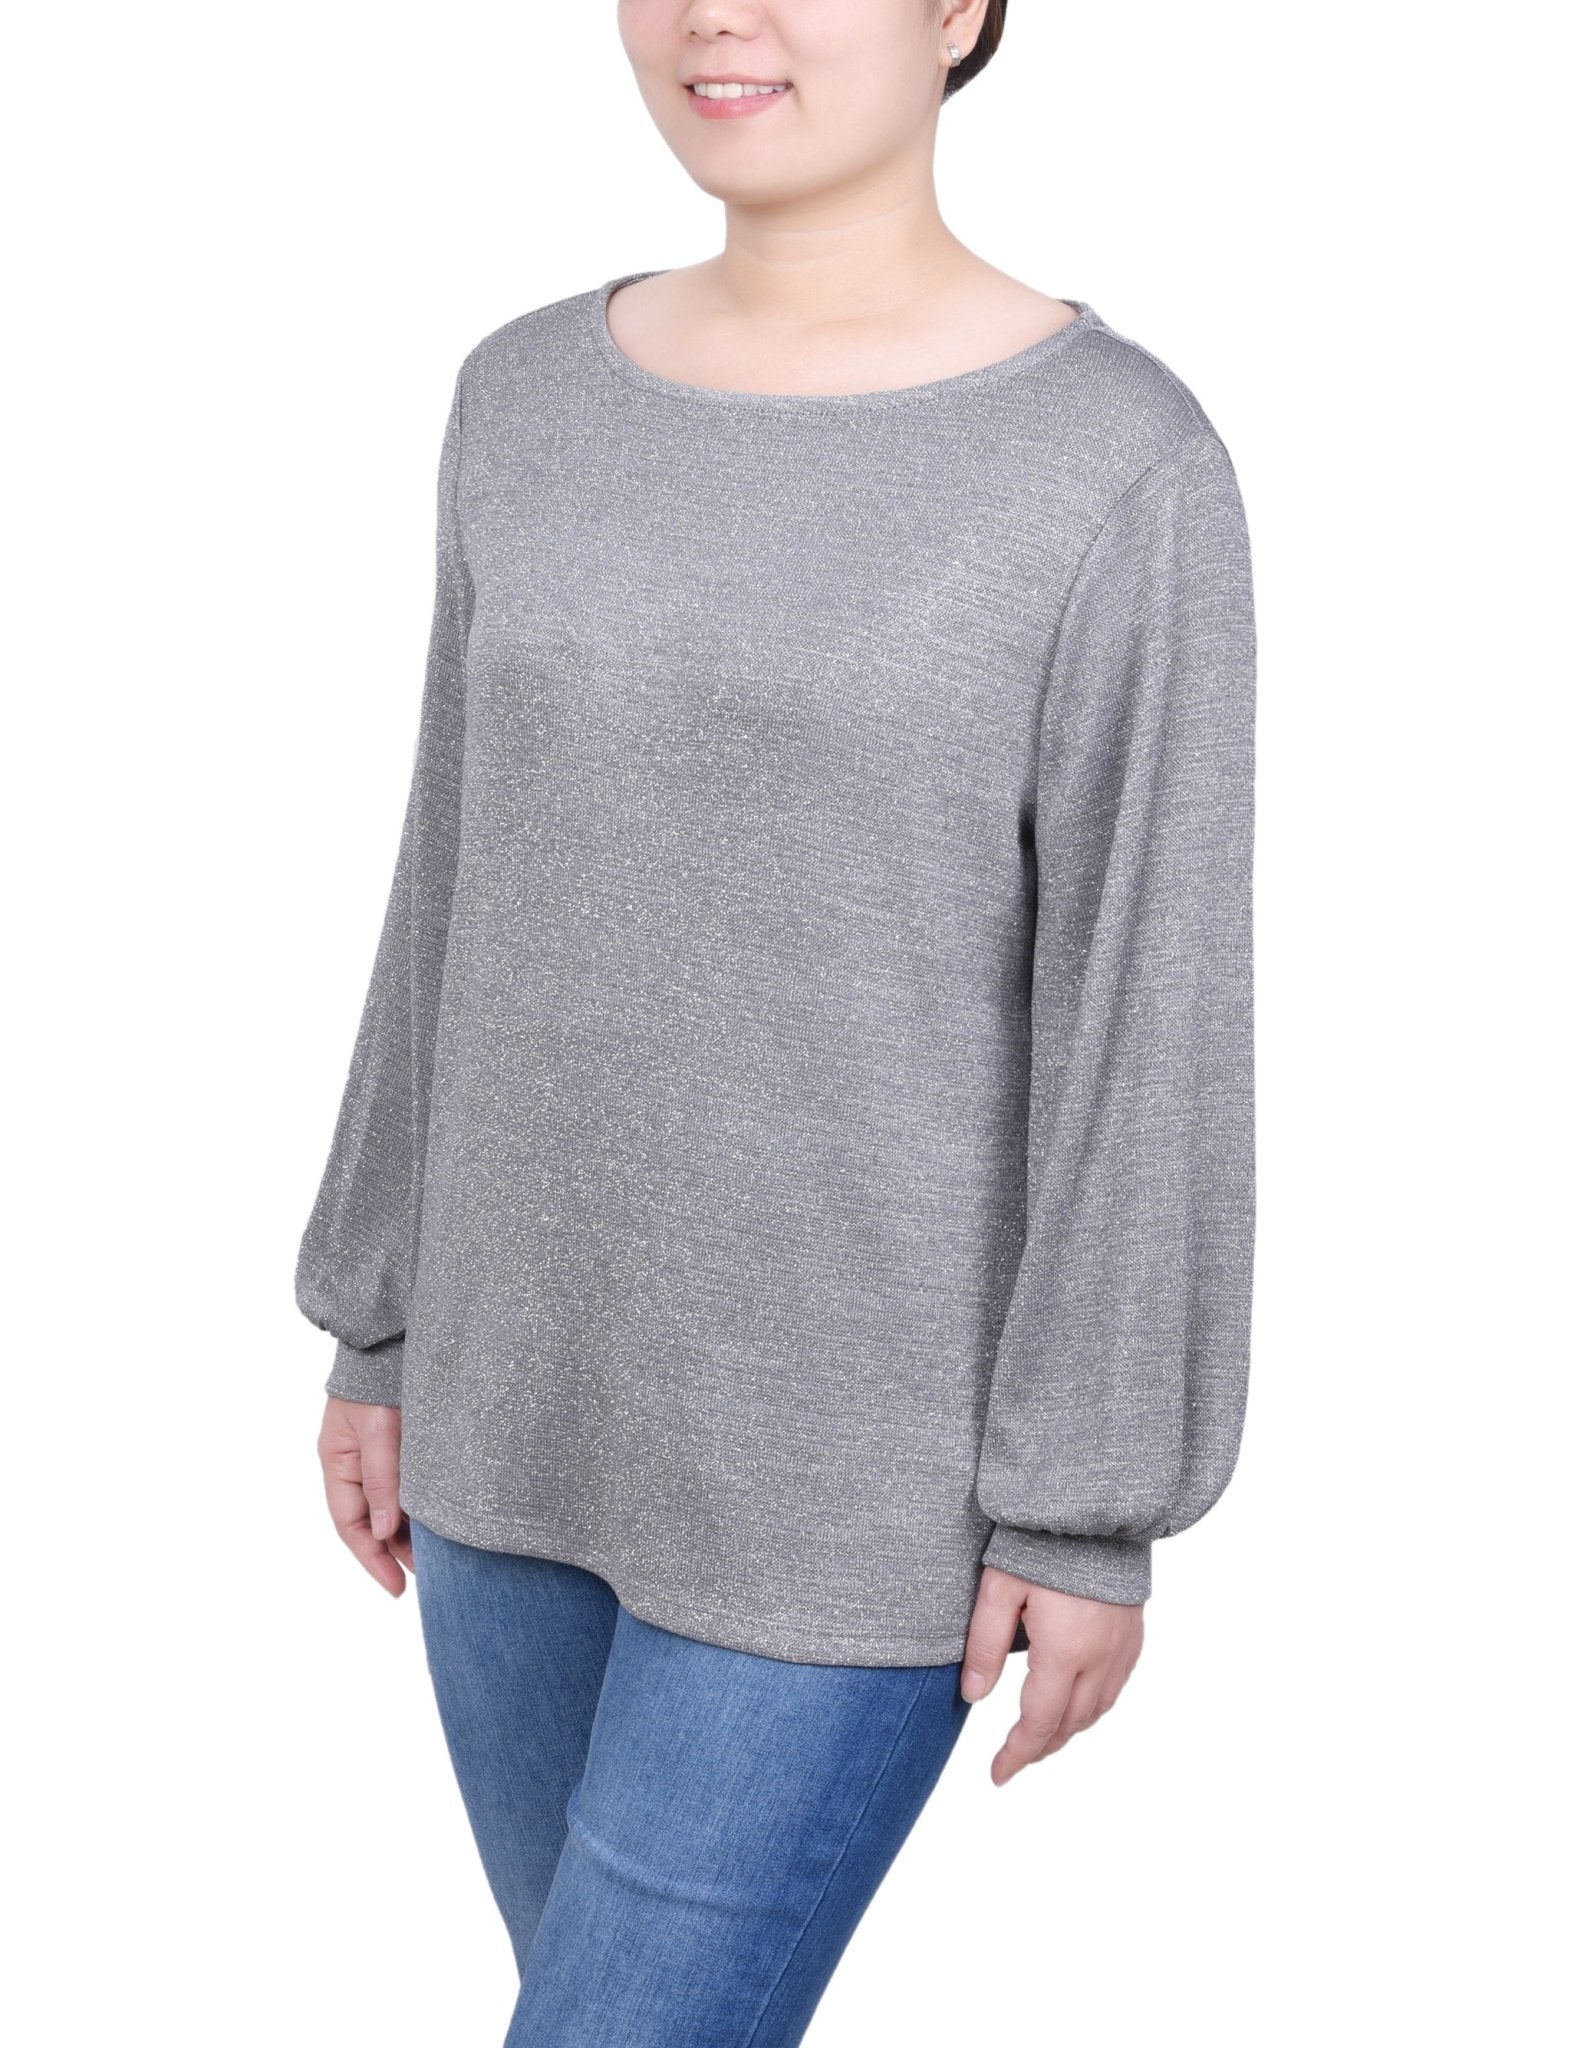 NY Collection Long Sleeve Tunic Top With Detachable Necklace - Petite - DressbarnShirts & Blouses